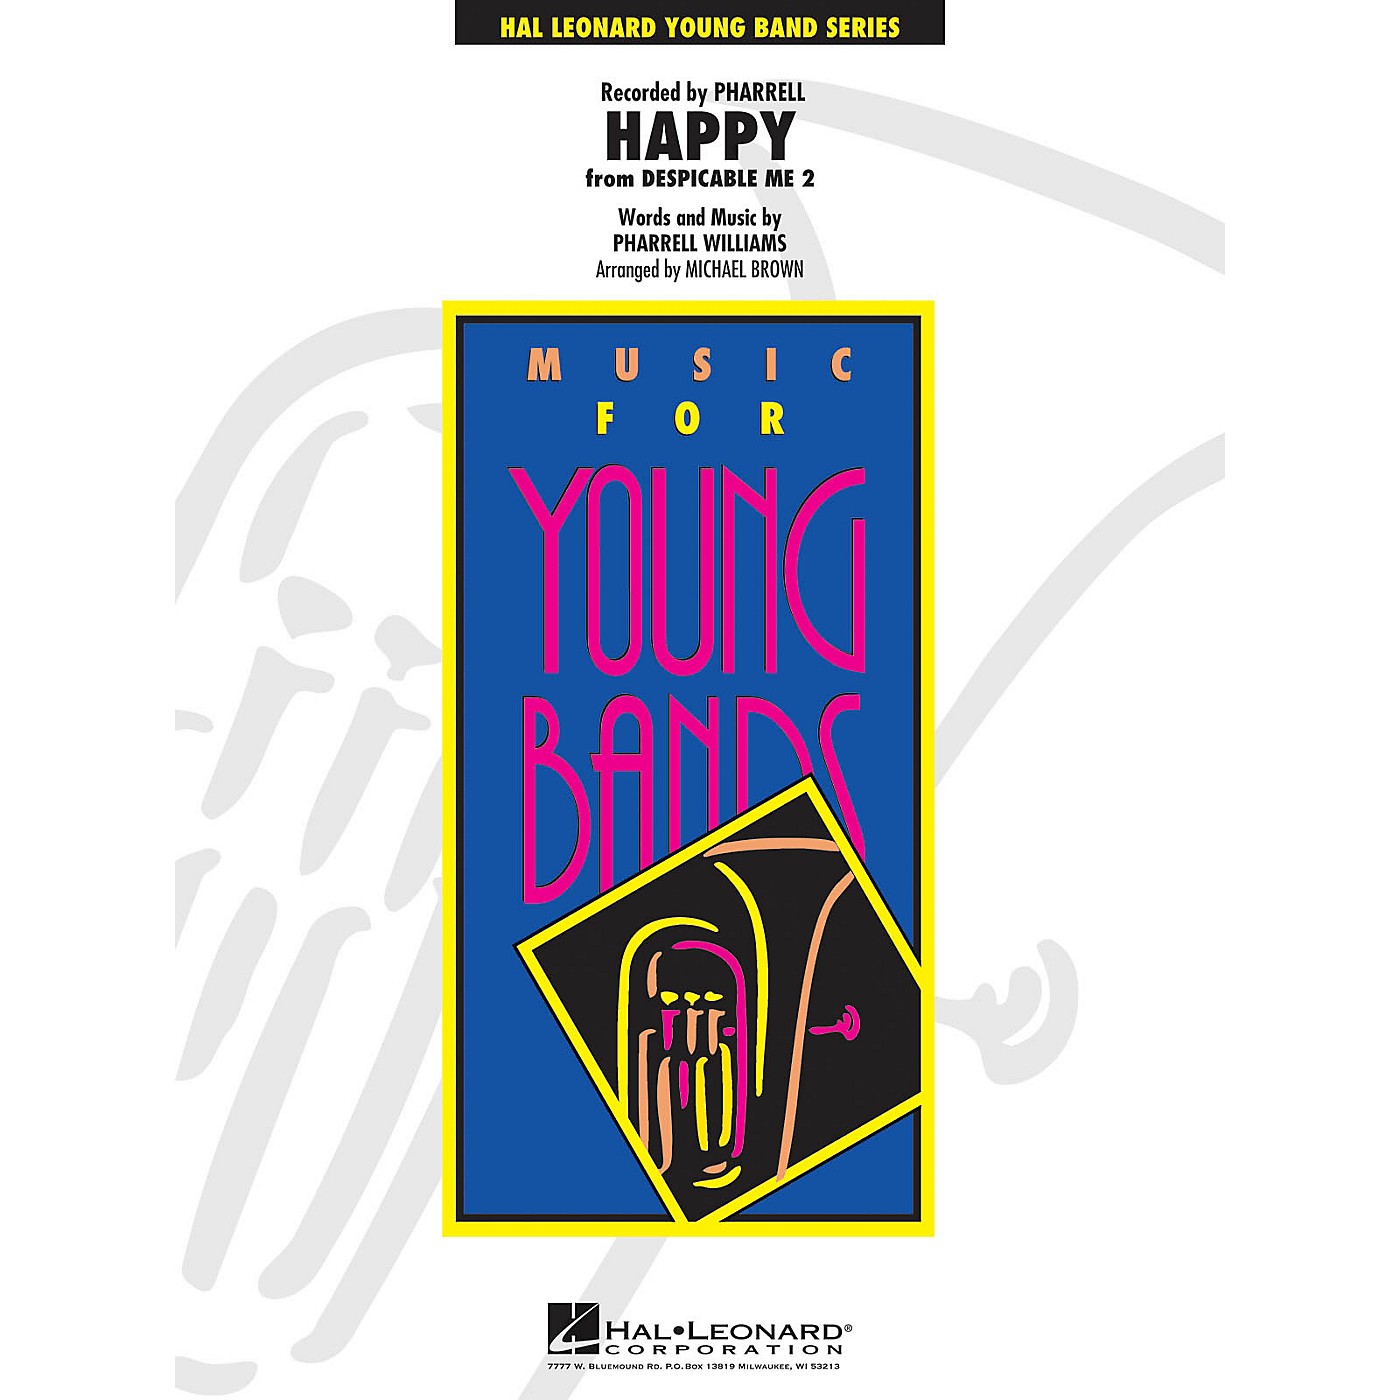 Hal Leonard Happy (from Despicable Me 2) - Young Concert Band Series Level 3 arranged by Michael Brown thumbnail